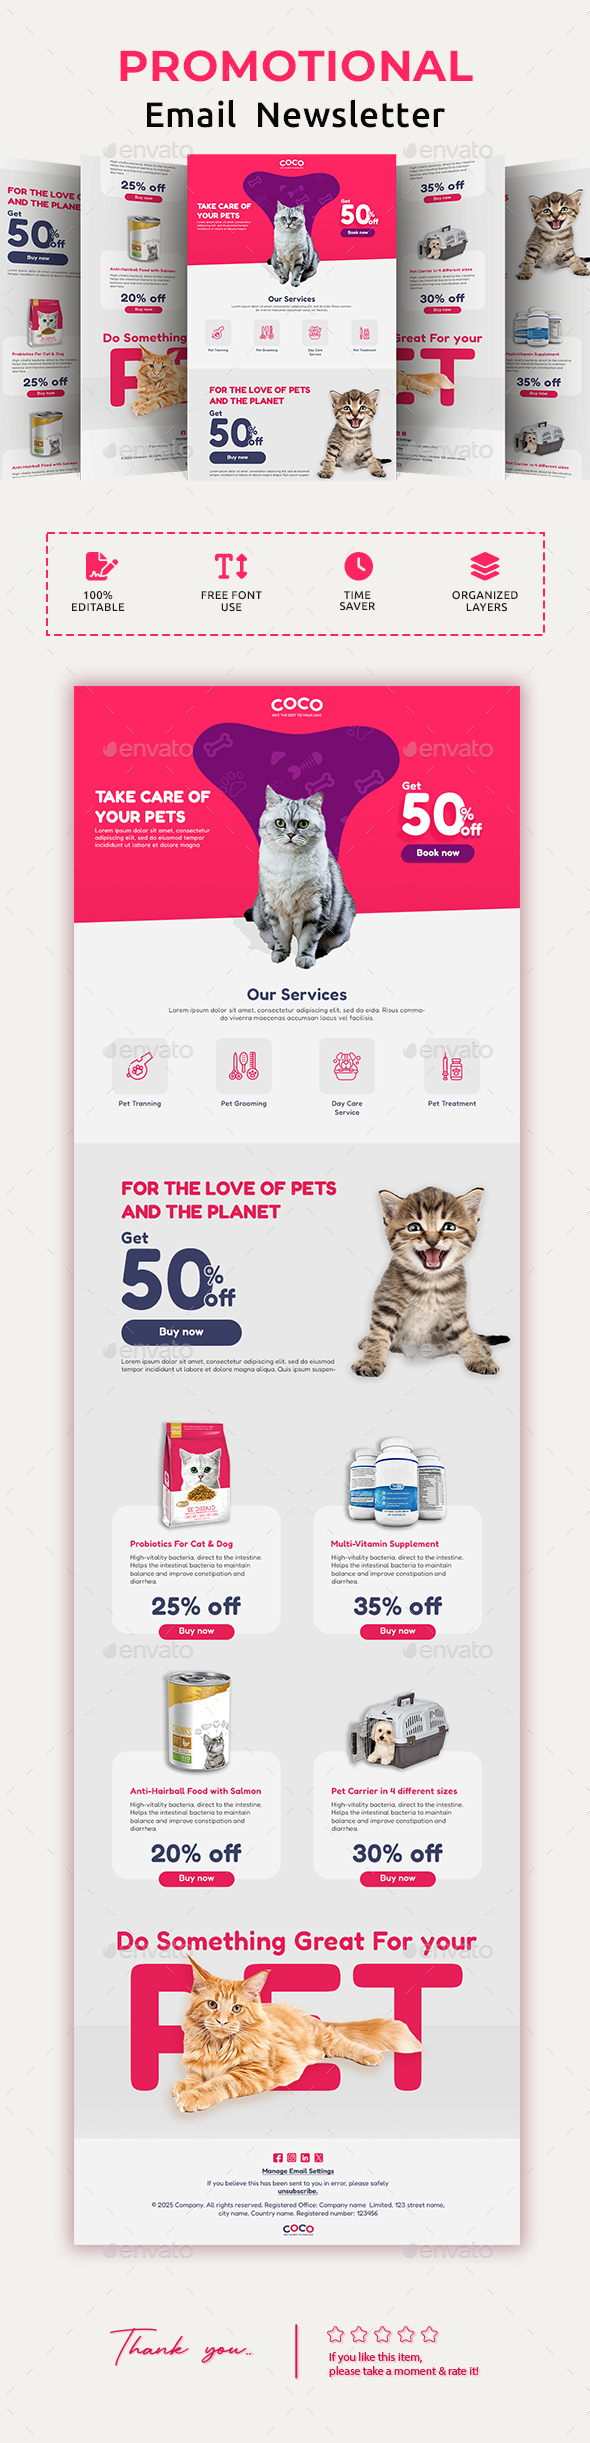 Pet Food Email Newsletter PSD Template